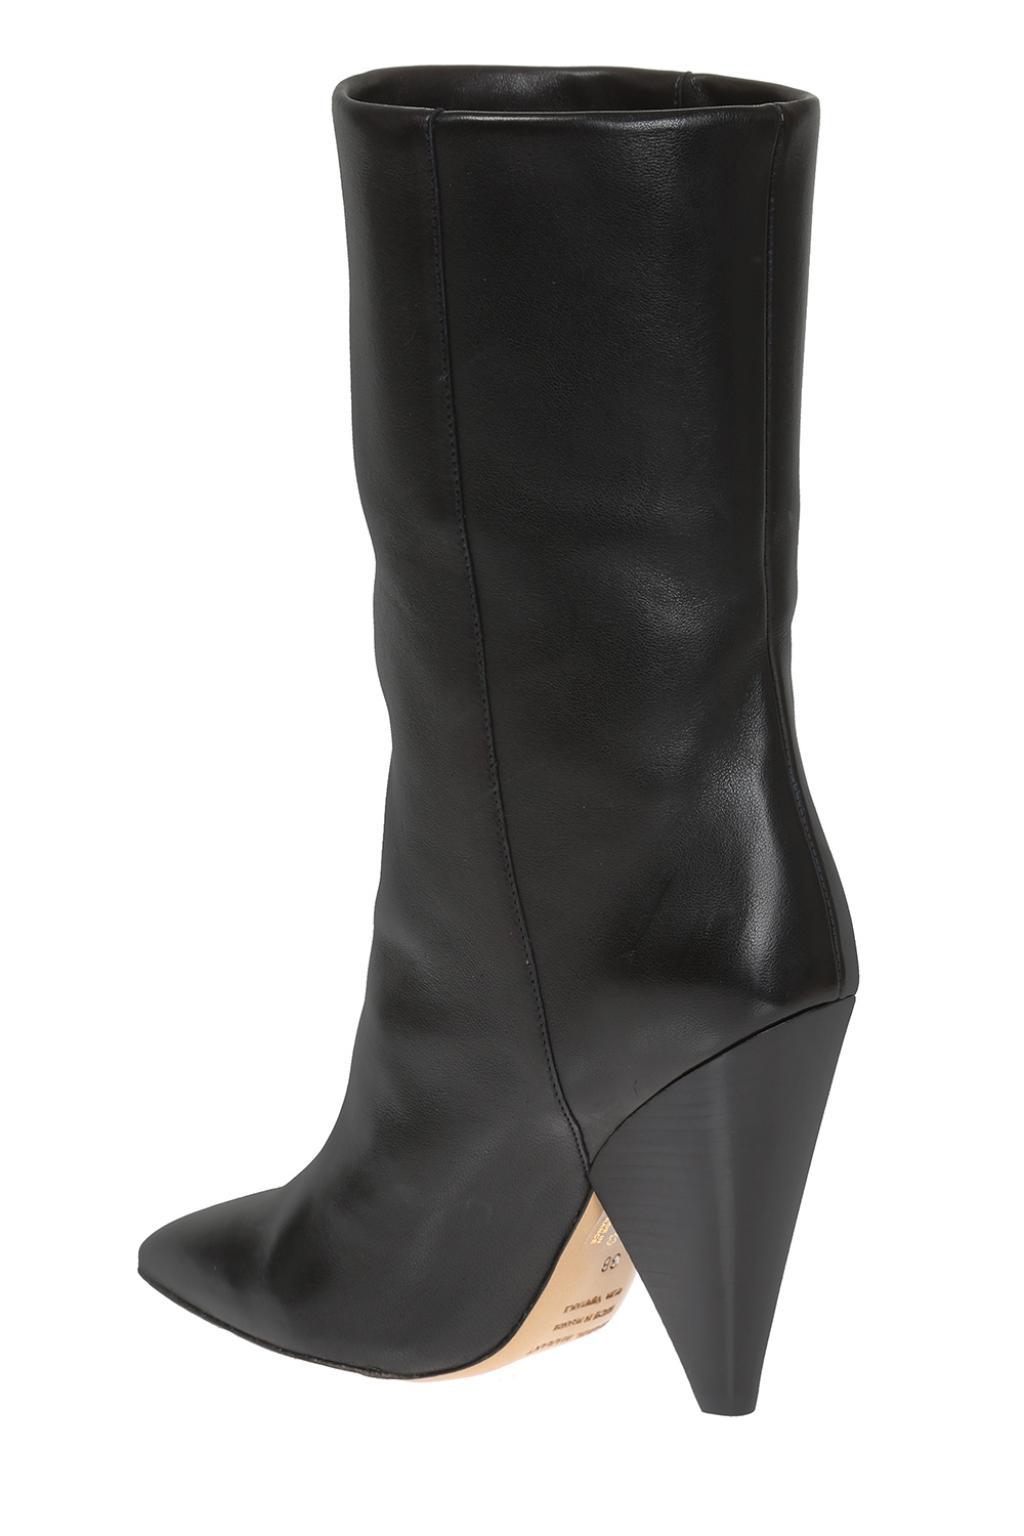 Isabel Marant Leather 'lexing' Heeled Boots in Black - Lyst